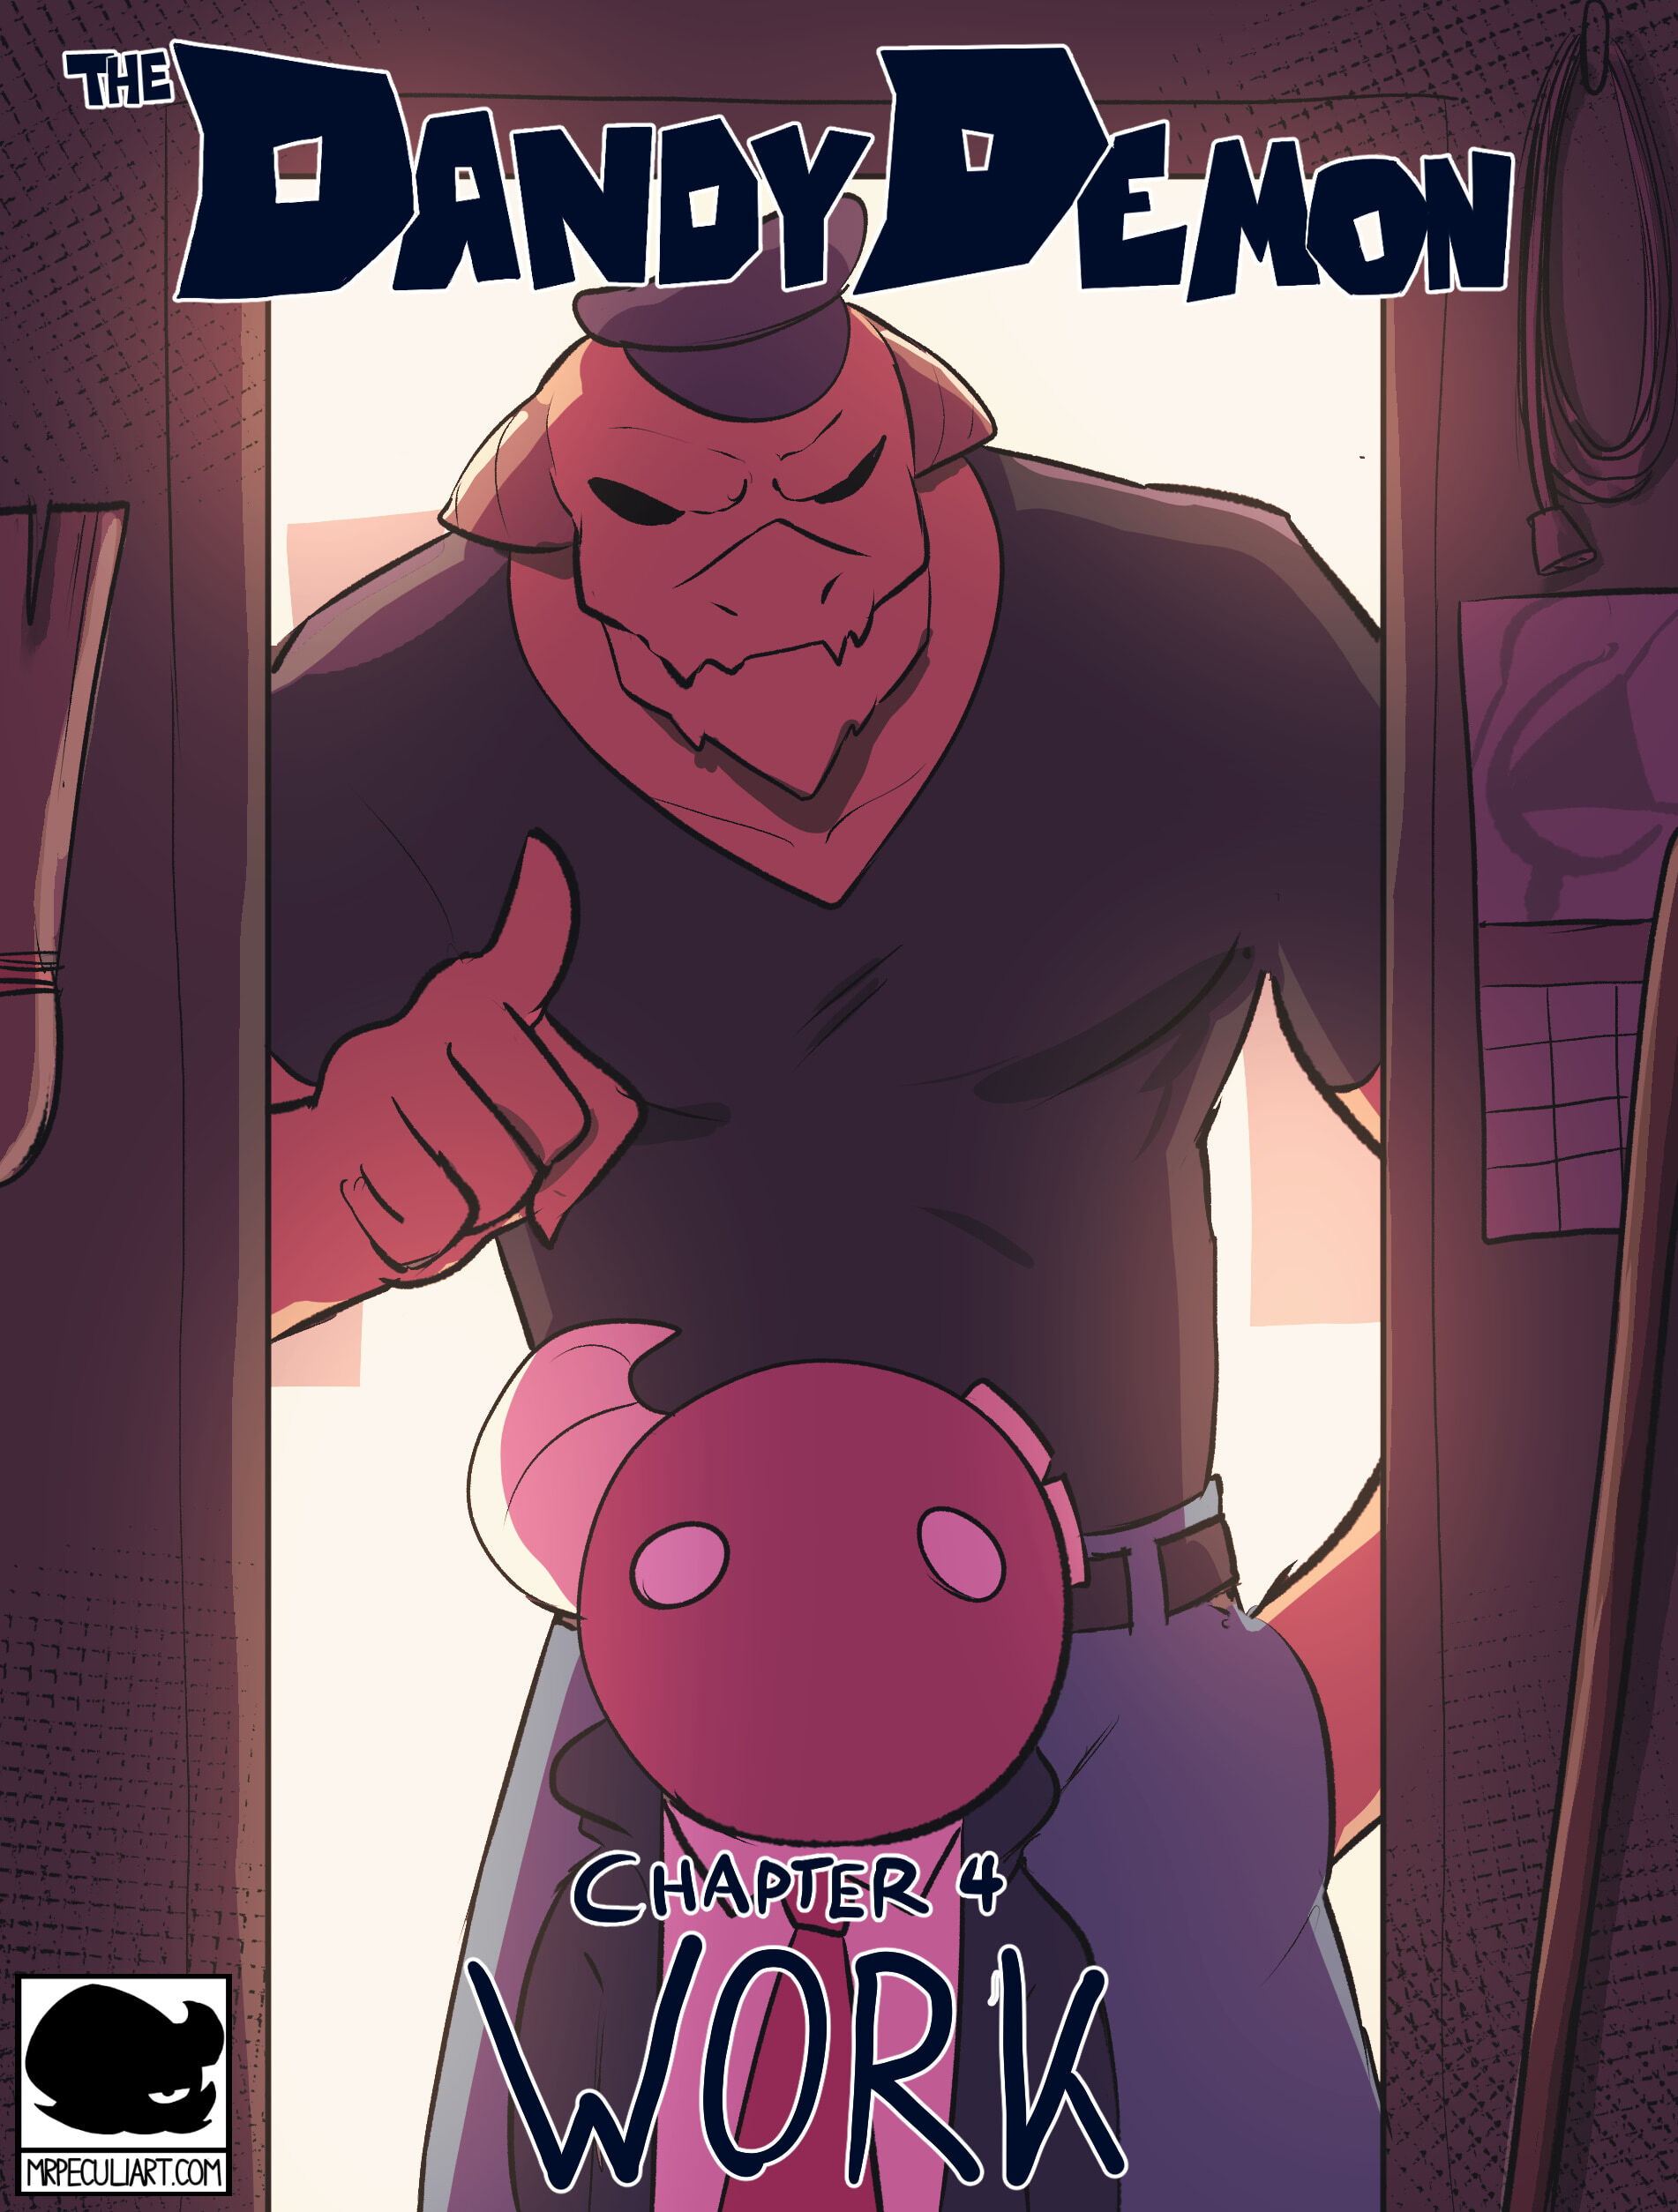 Dandy Demons Chapter 4 Work - Page 1